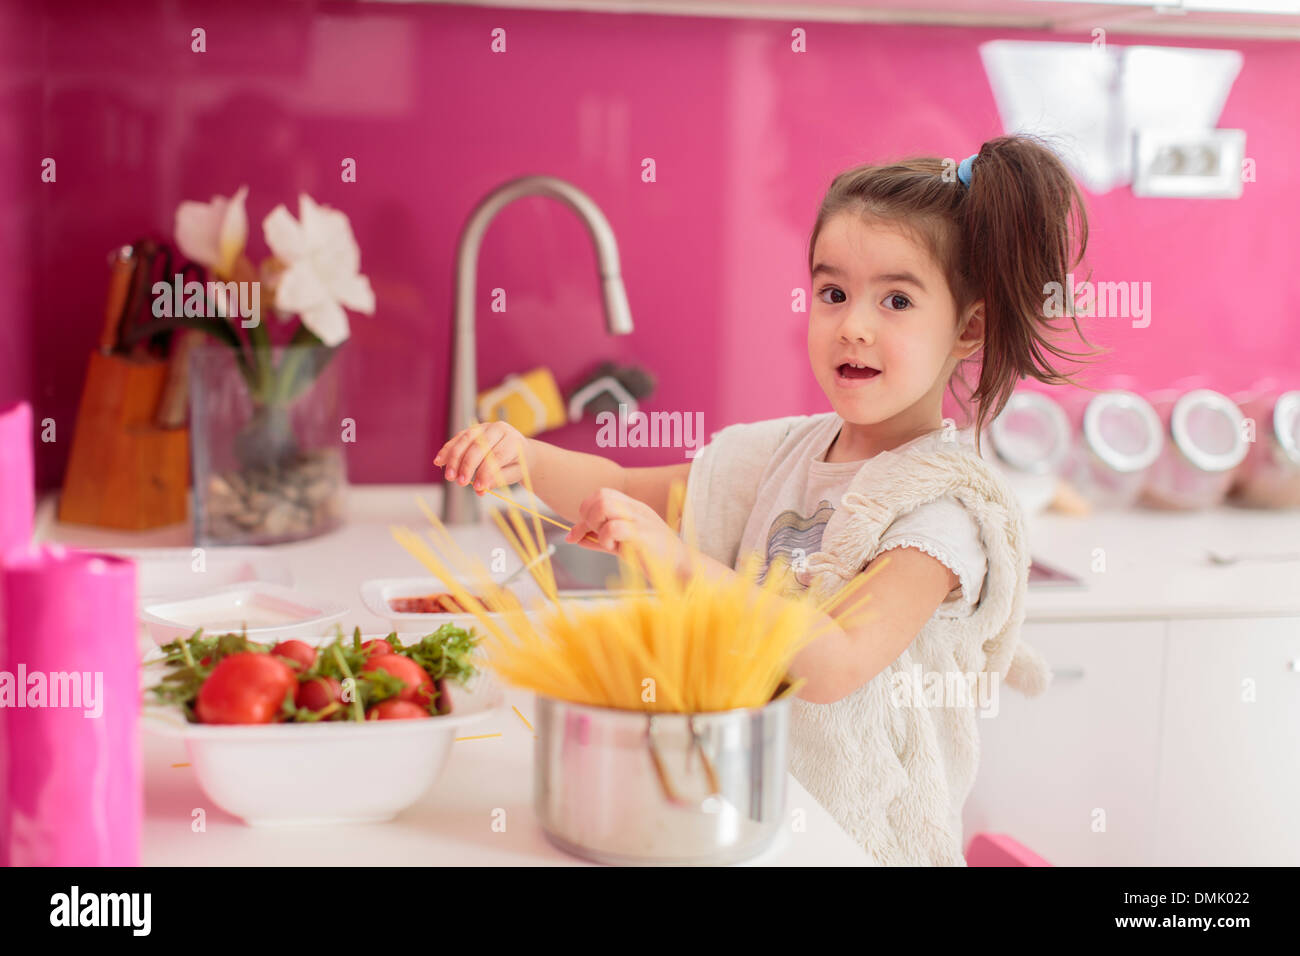 Little girl in the kitchen Stock Photo